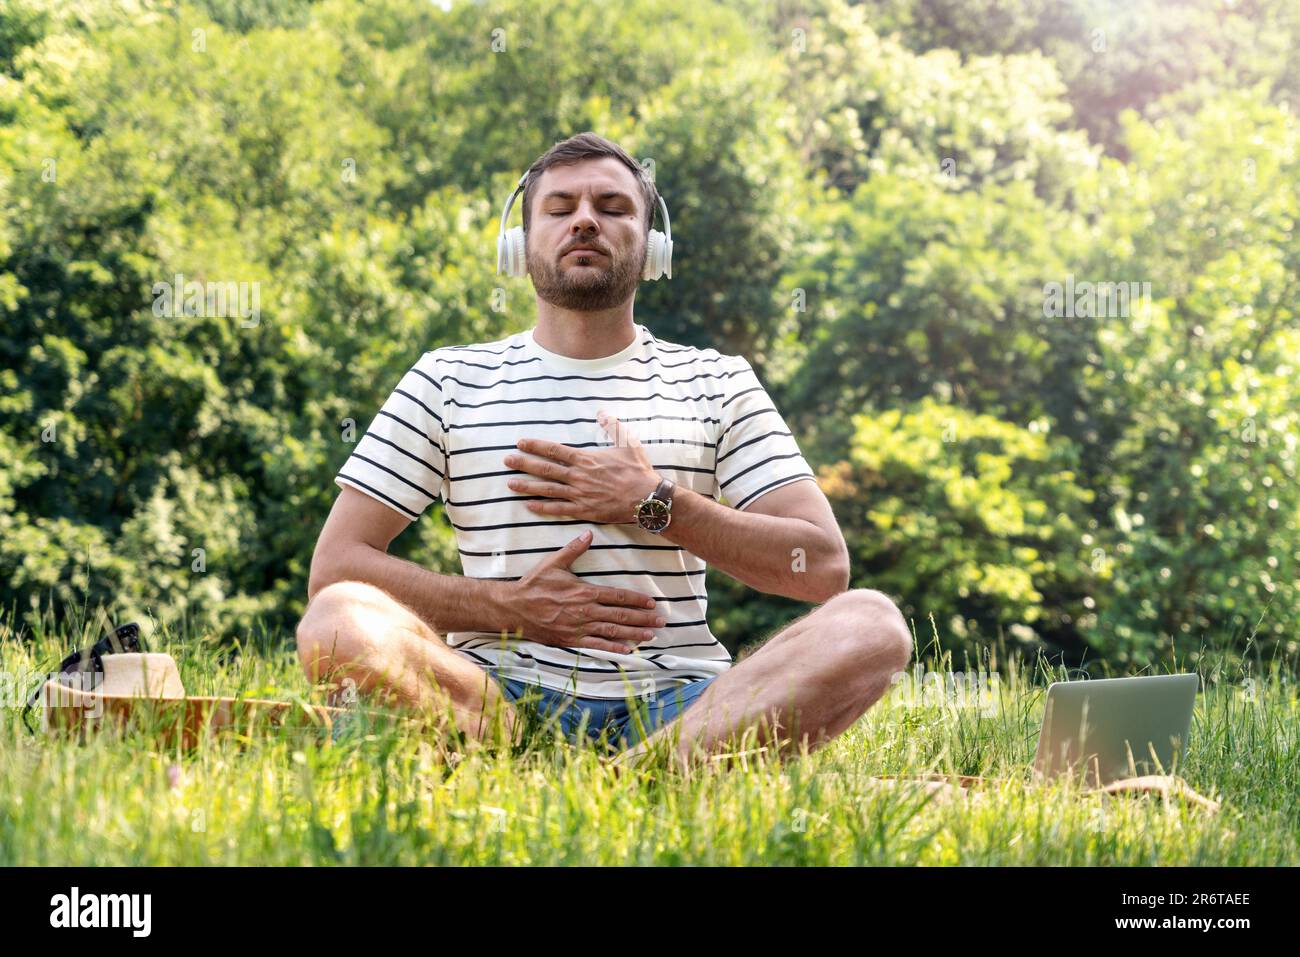 Man wearing headphones doing yoga breathing exercise in half lotus position in the park, listening music for meditation. Stock Photo